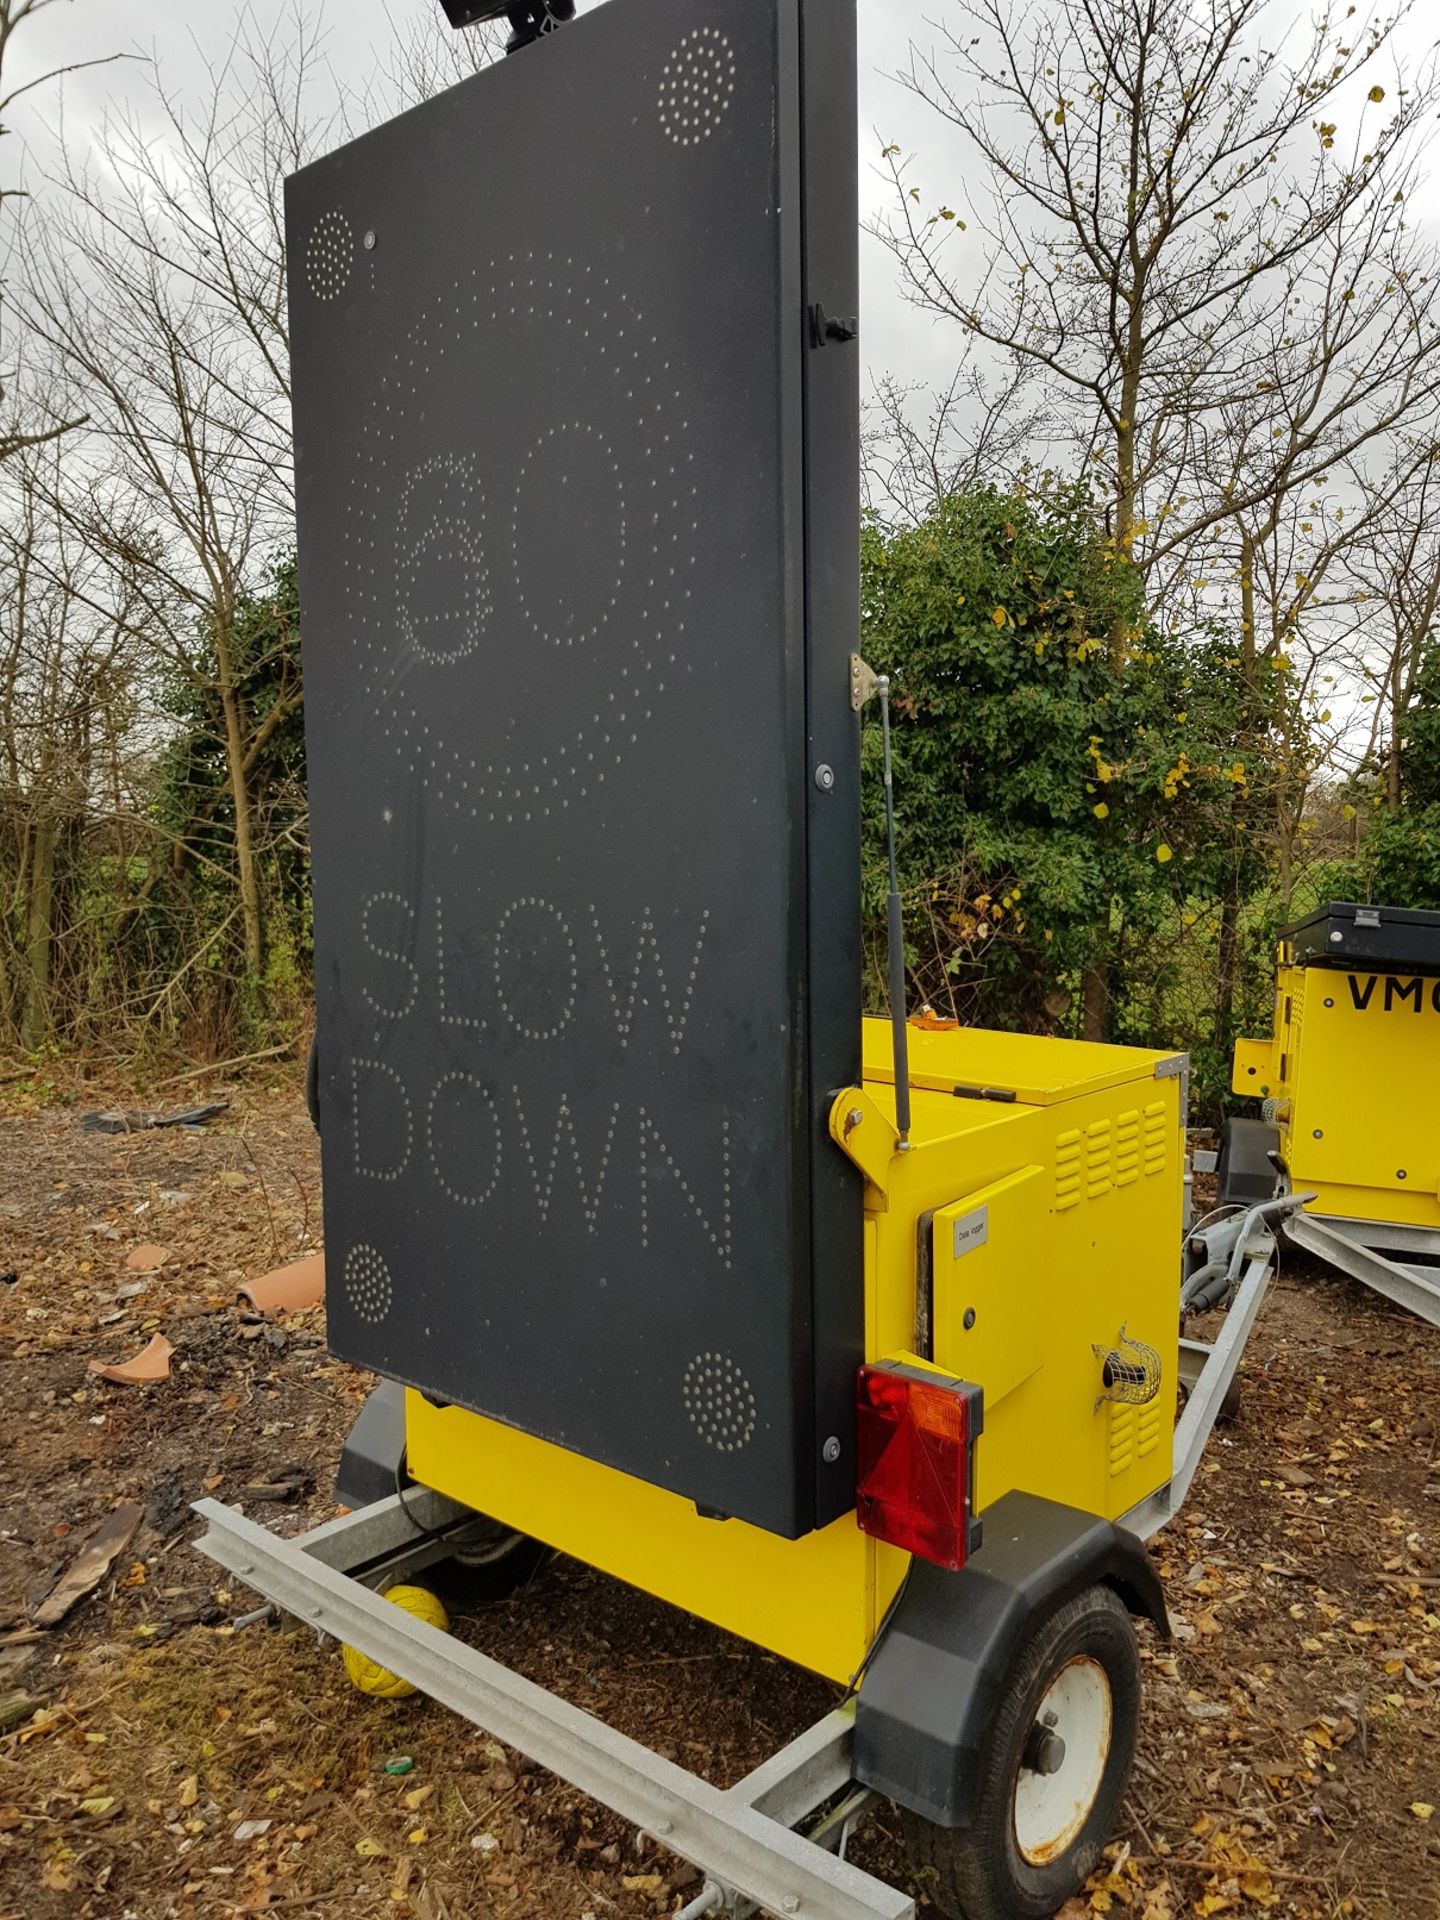 SPEED CAMERA C/W LED DISPLAY TRAILER-MOUNTED SINGLE AXLE SPEED SIGN TRAFFIC MANAGEMENT - Image 2 of 3